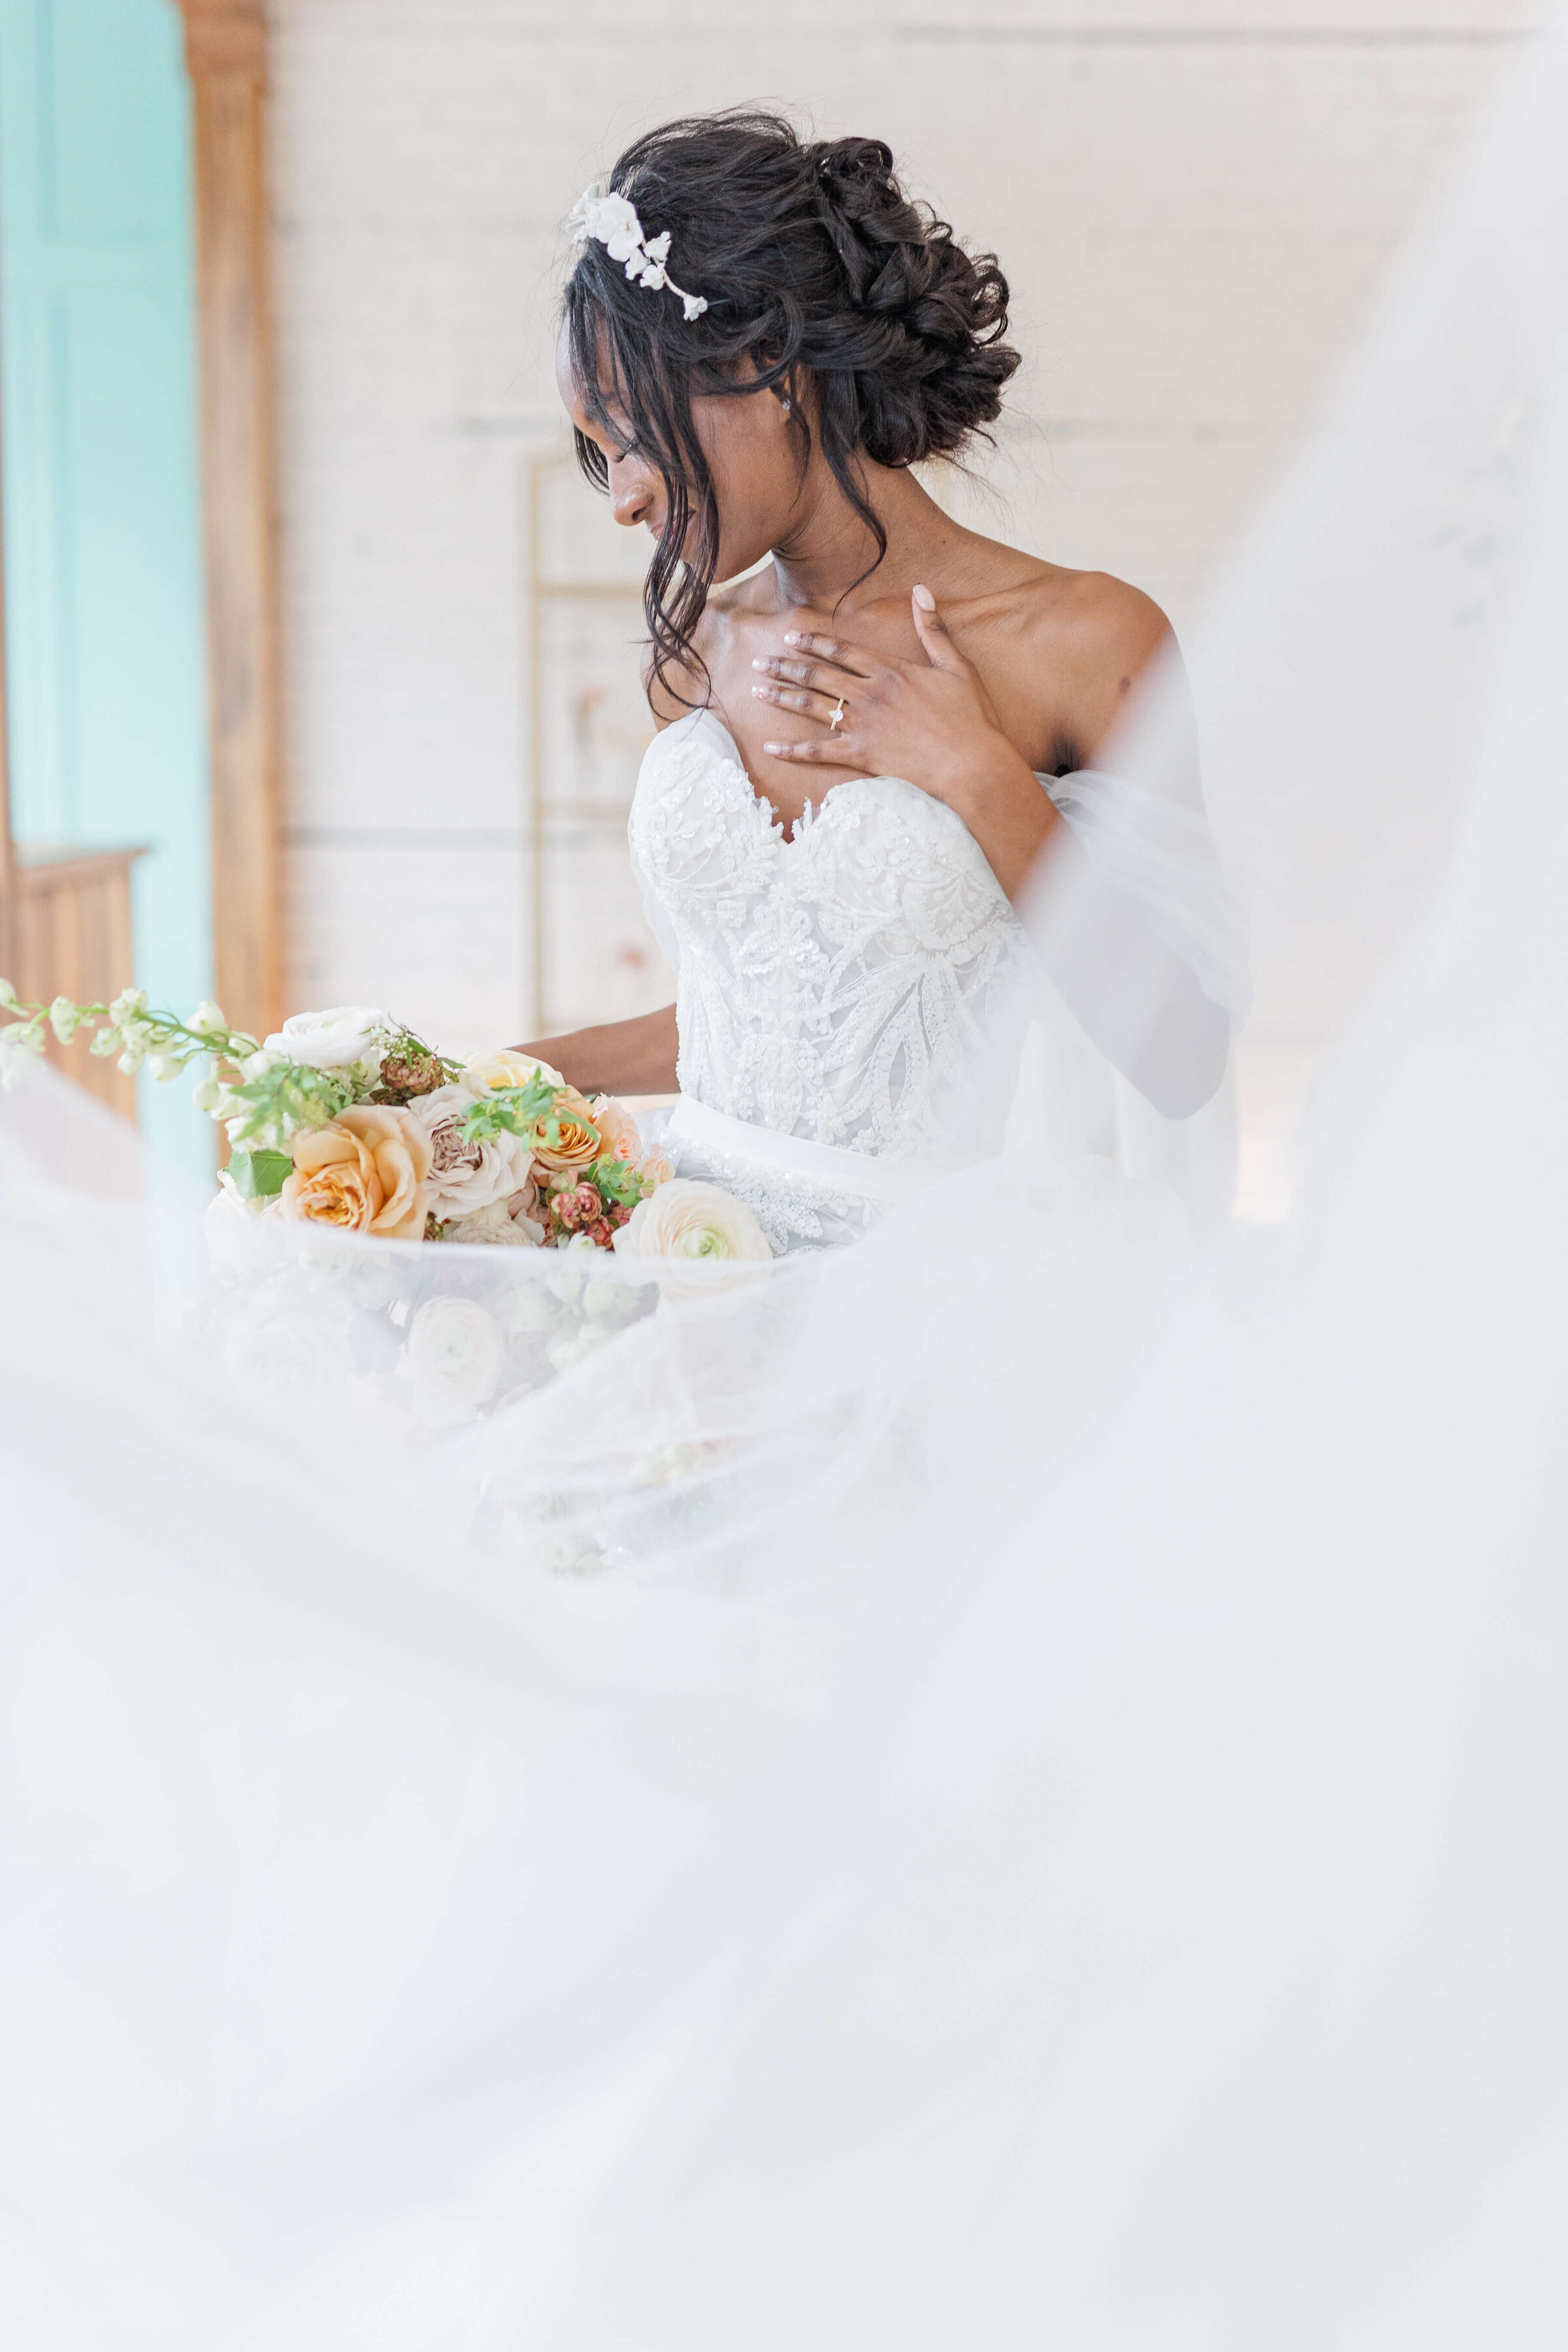 A bride has her dress blowing as the looks down with her hand on her chest. there is a light blue and white wall in back of her.